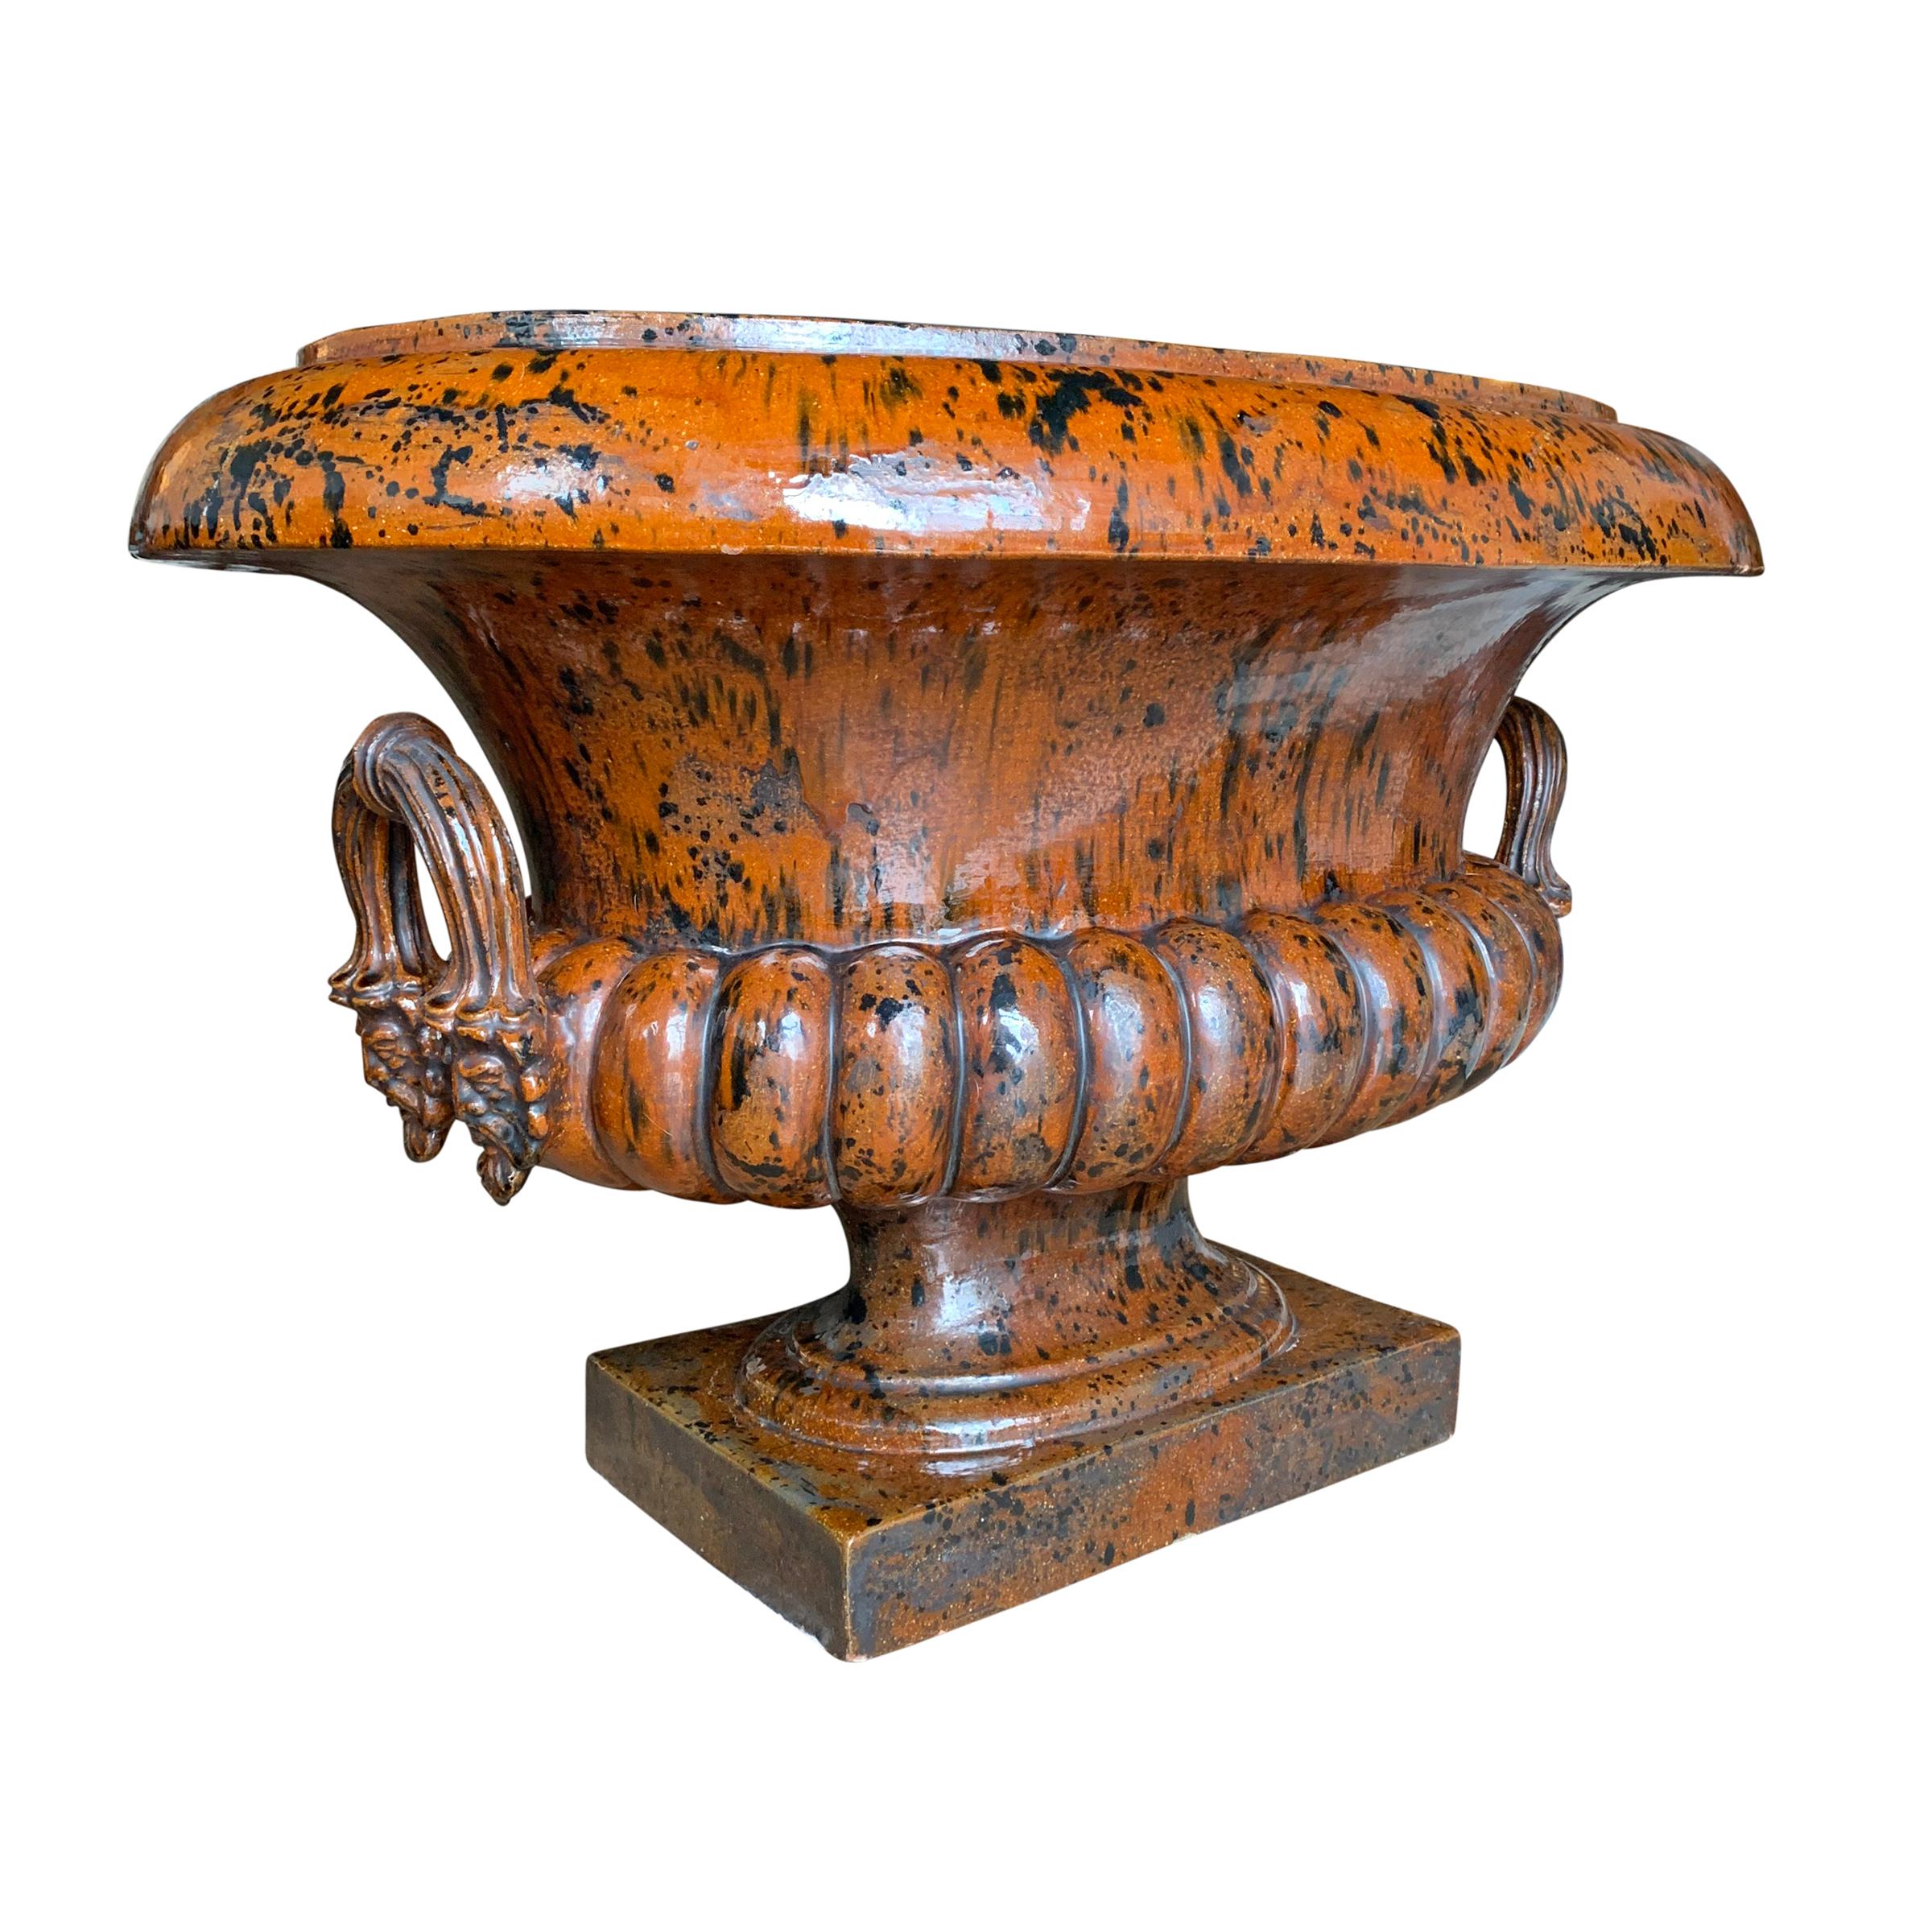 Monumental Mid-20th Century Italian Ceramic Urn In Good Condition For Sale In Chicago, IL